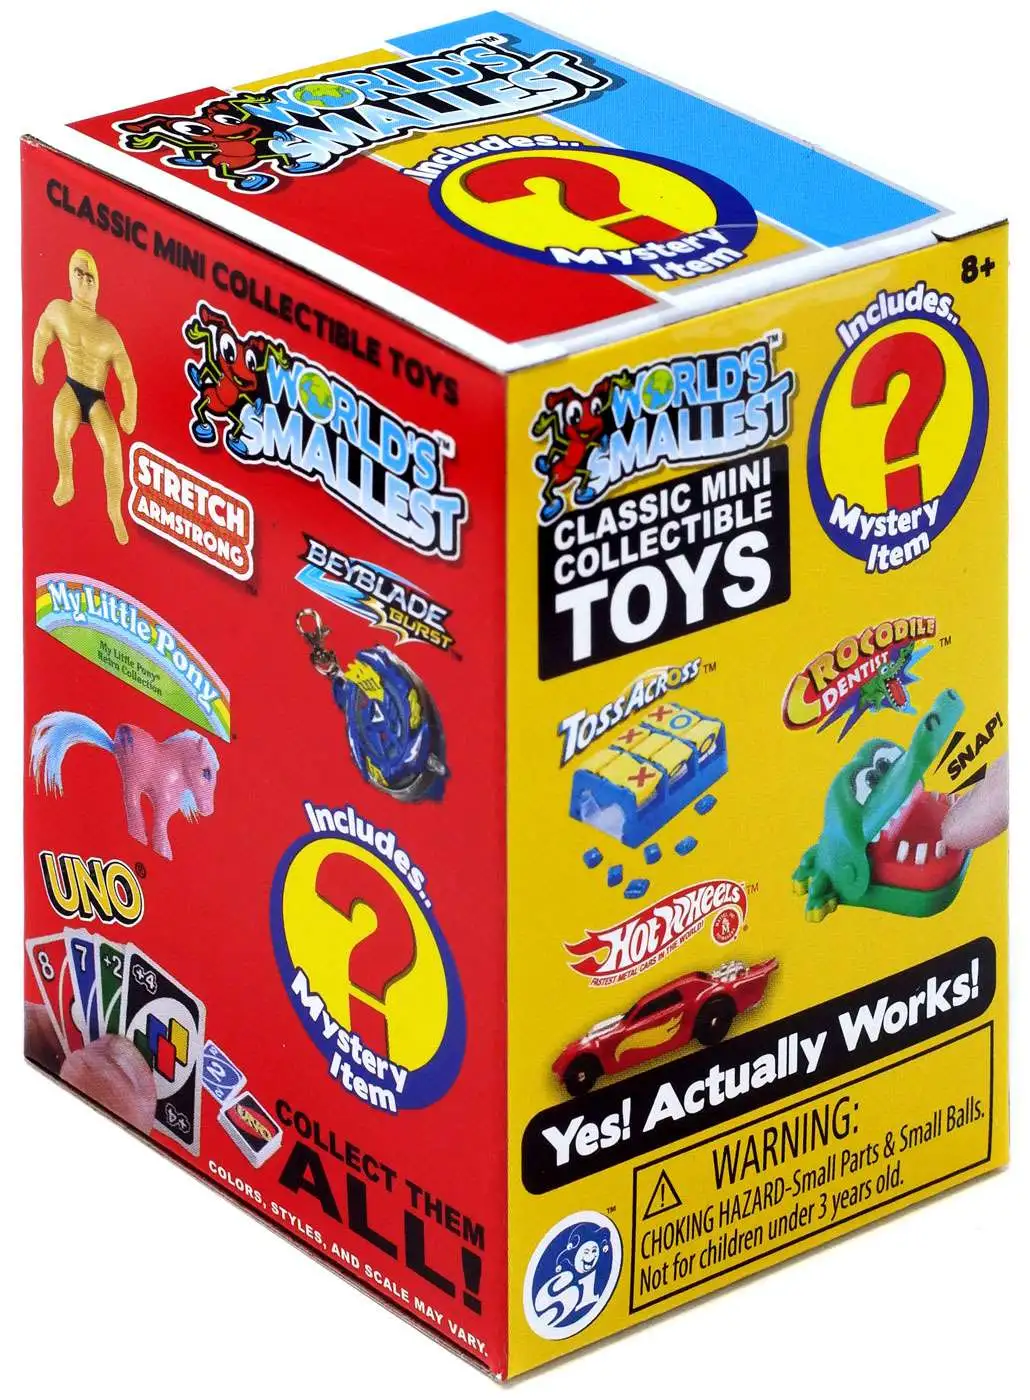 Worlds Smallest Classic Novelty Toy Series 4 Blind Box - 1 Count